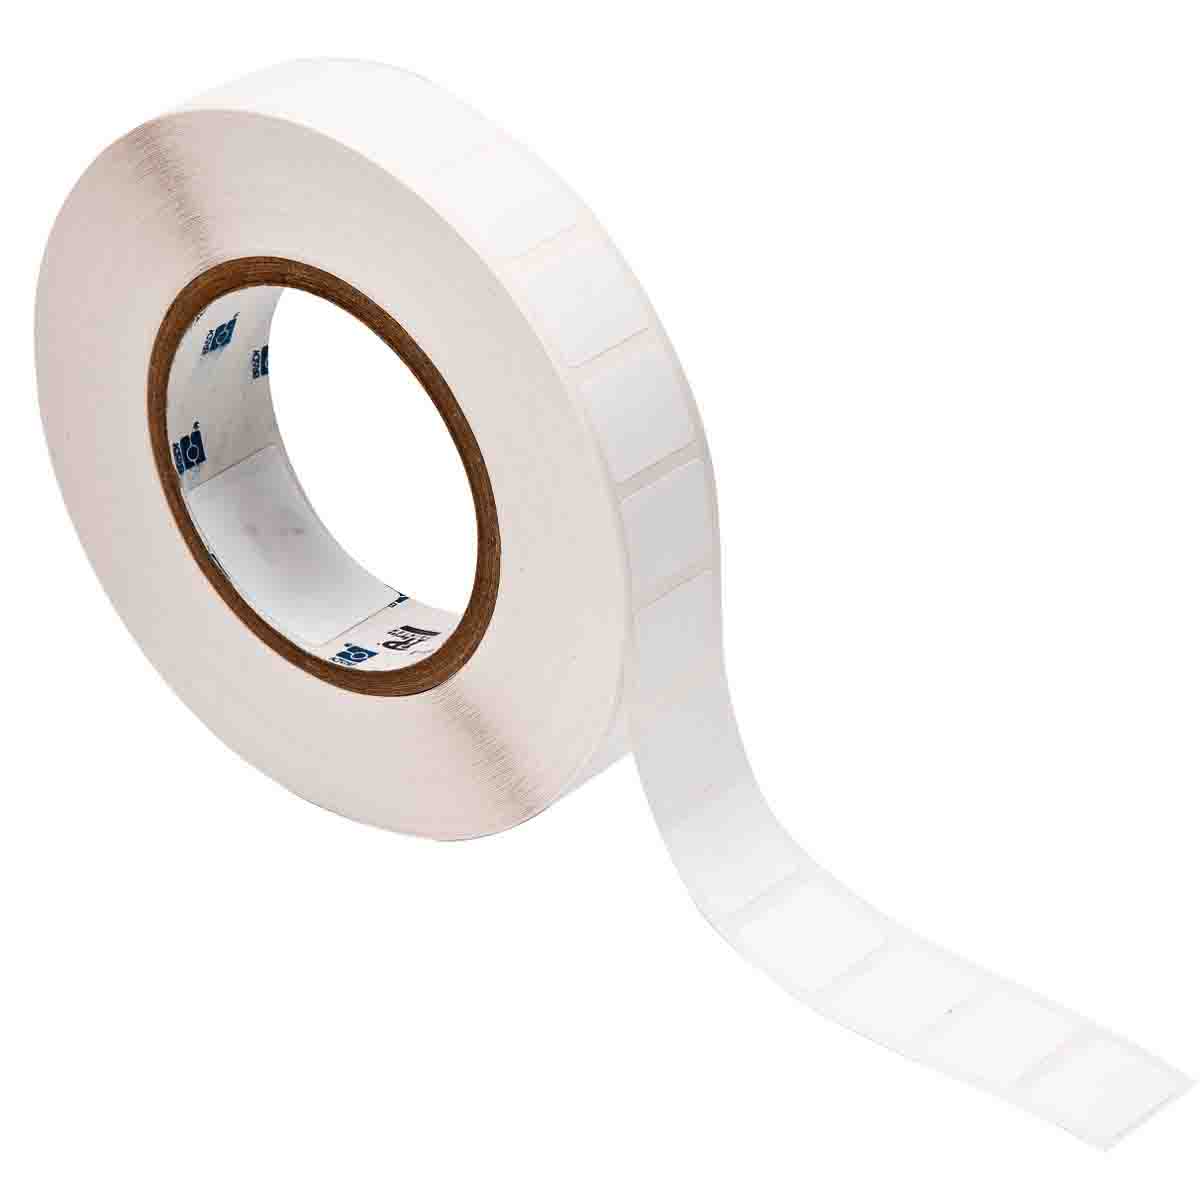 SBL-34 Red Border Labeling Tape for the Lab